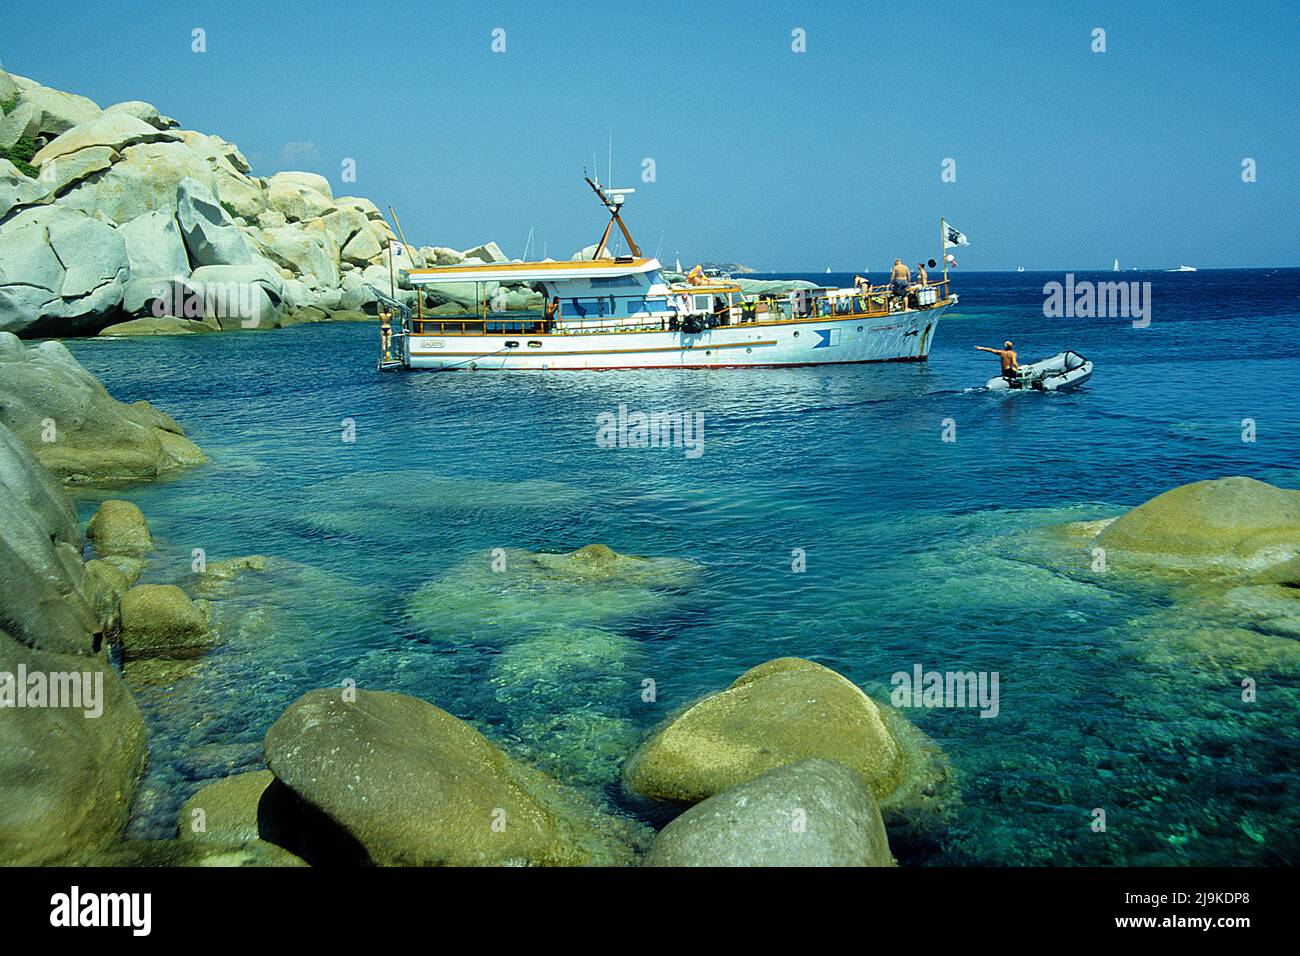 Diving boat MS Galiote at Lavezzi islands, group of small granite island between Corsica and Sardinia, Corsica, France, Mediterranean, Europe Stock Photo